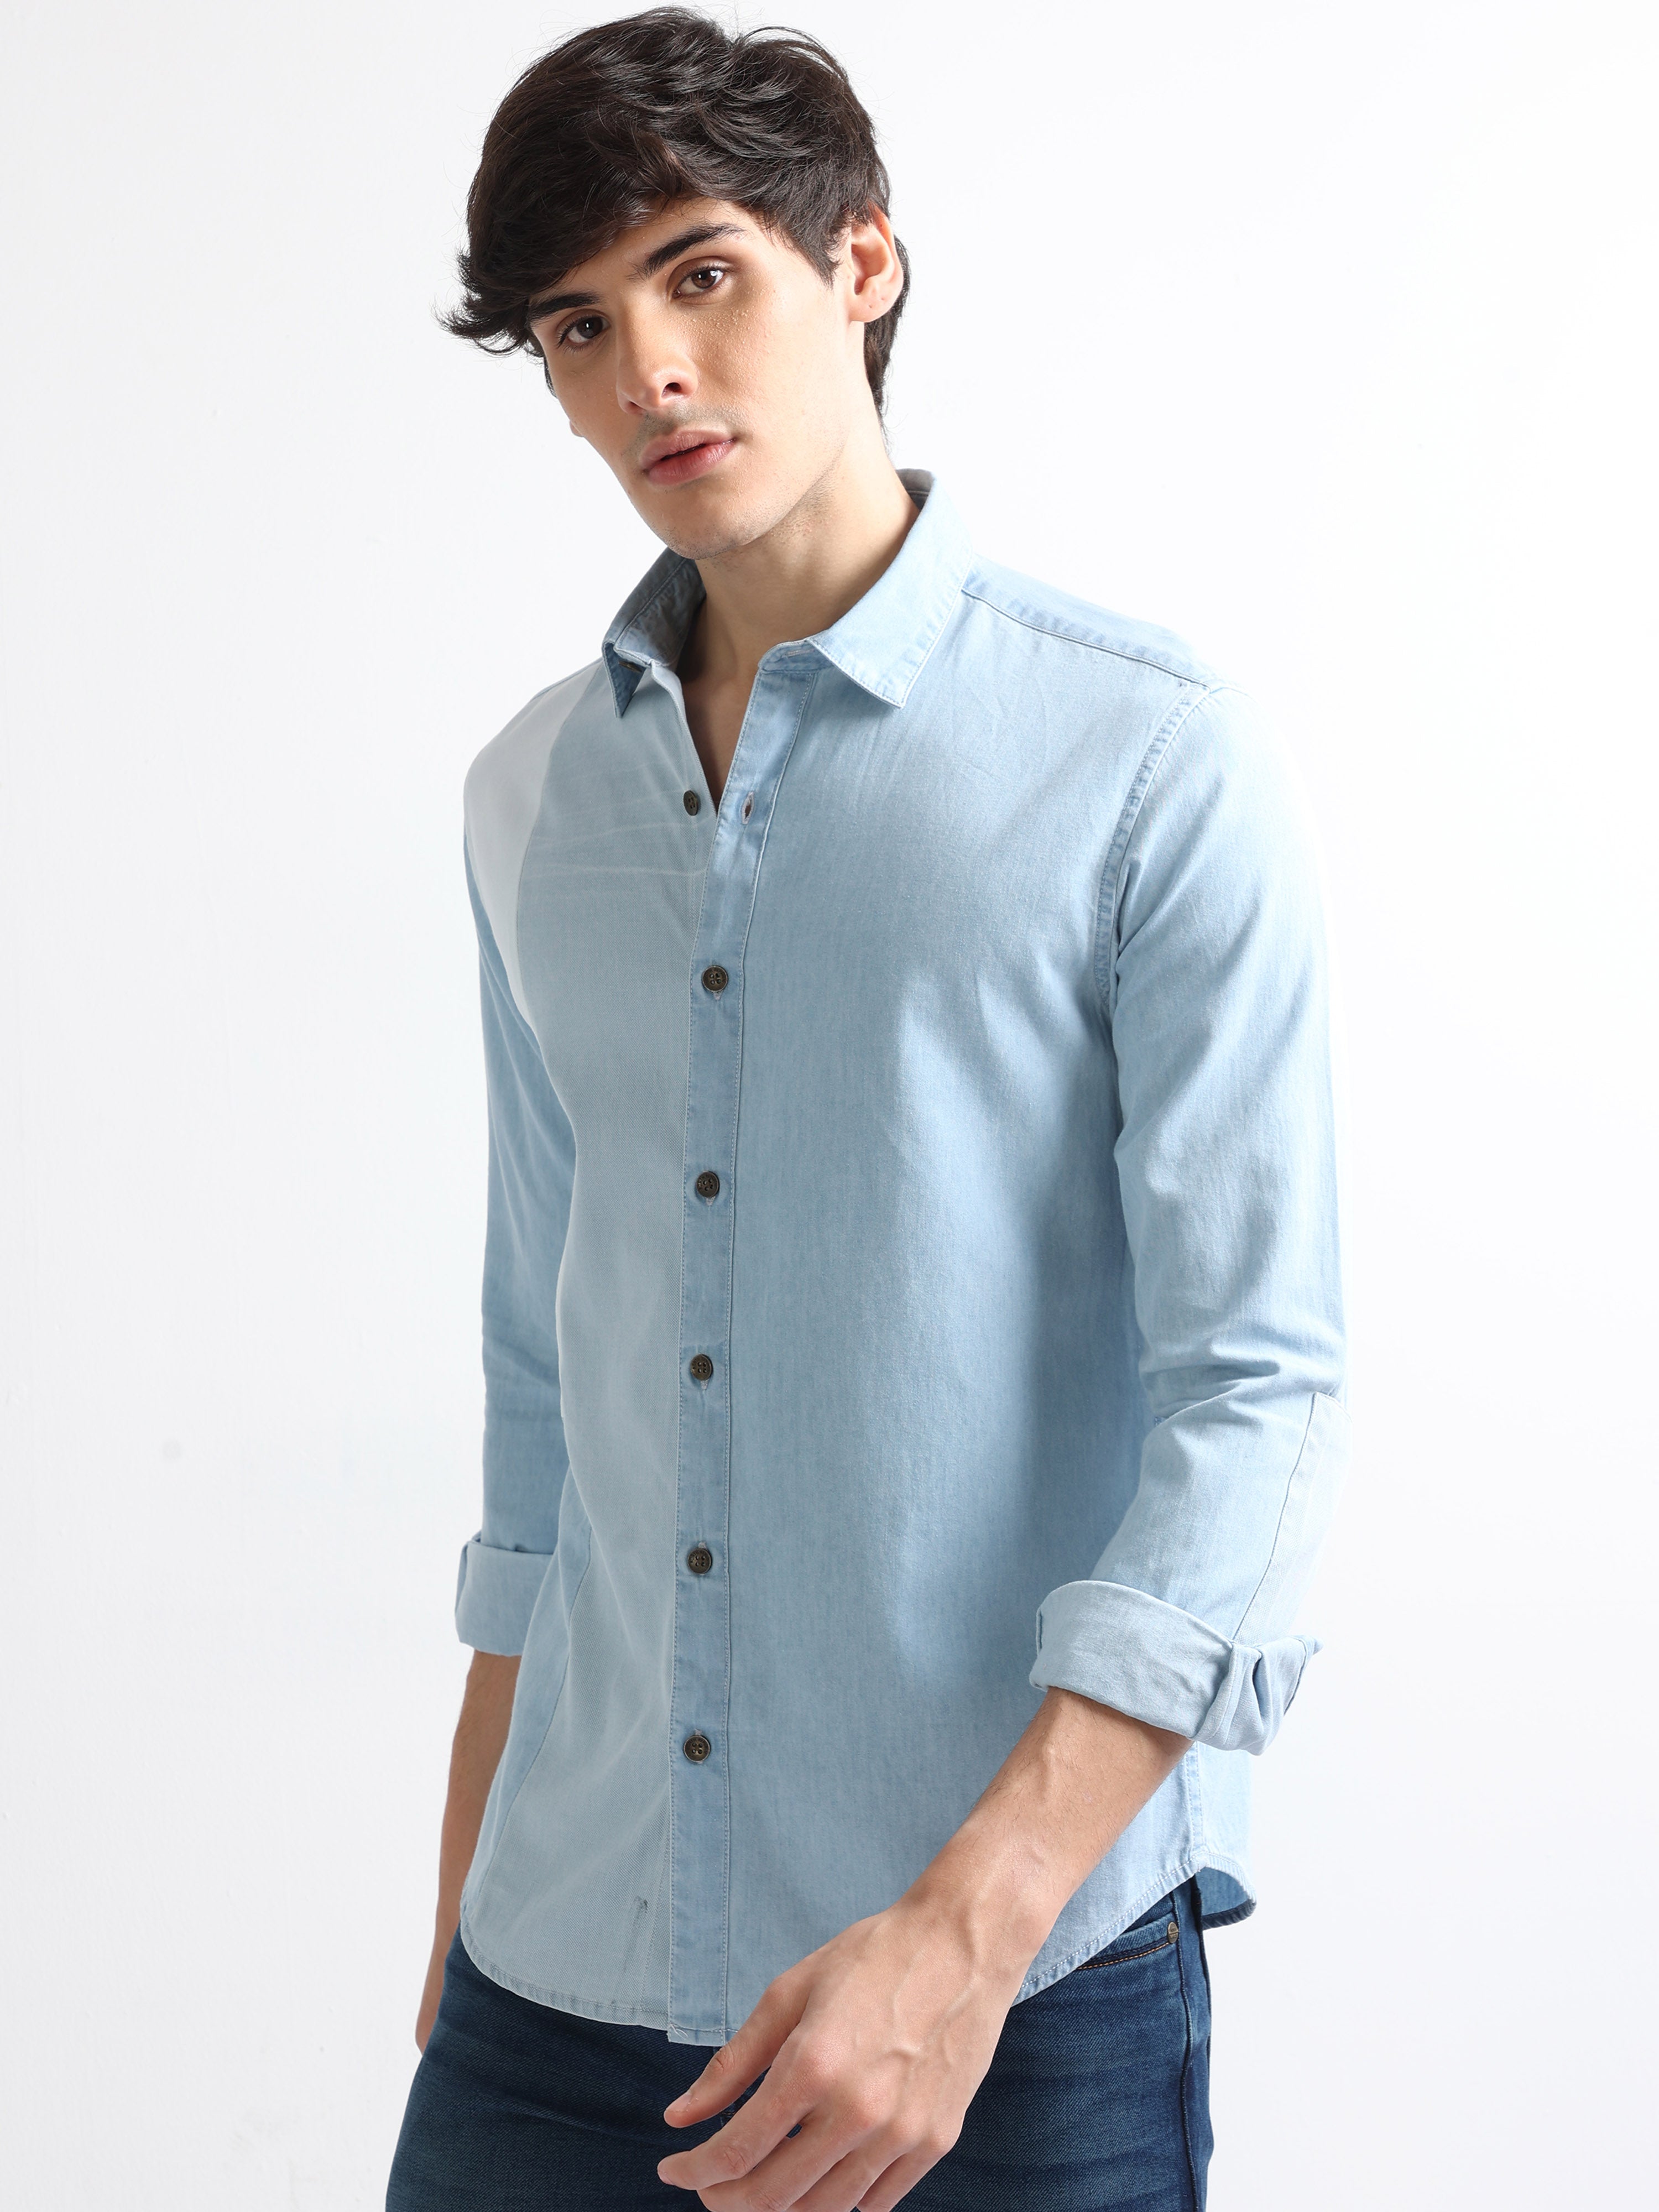 Buy Mens Muscle Fit Denim Shirts | Tapered Fit Denim Shirts - Tapered –  Tapered Menswear